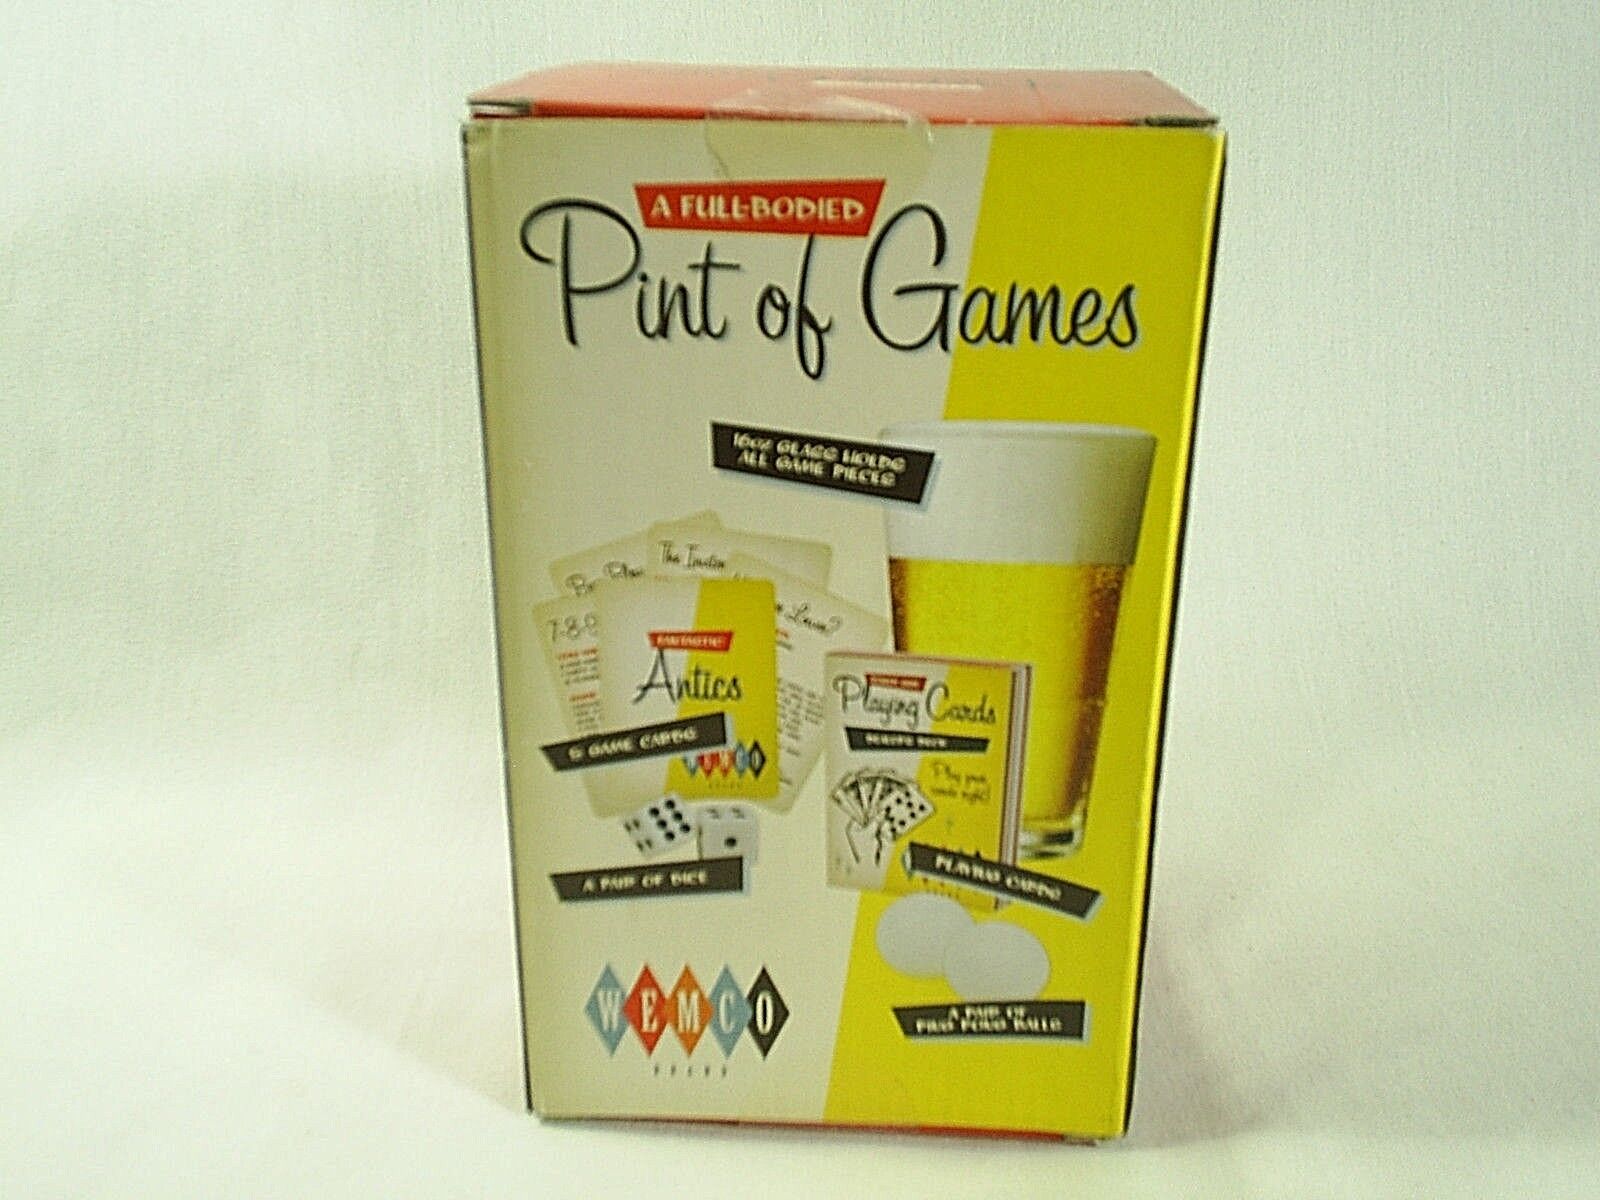 Party Drinking Game A Full Bodied Pint Of Games Wemco Adult Game NEW